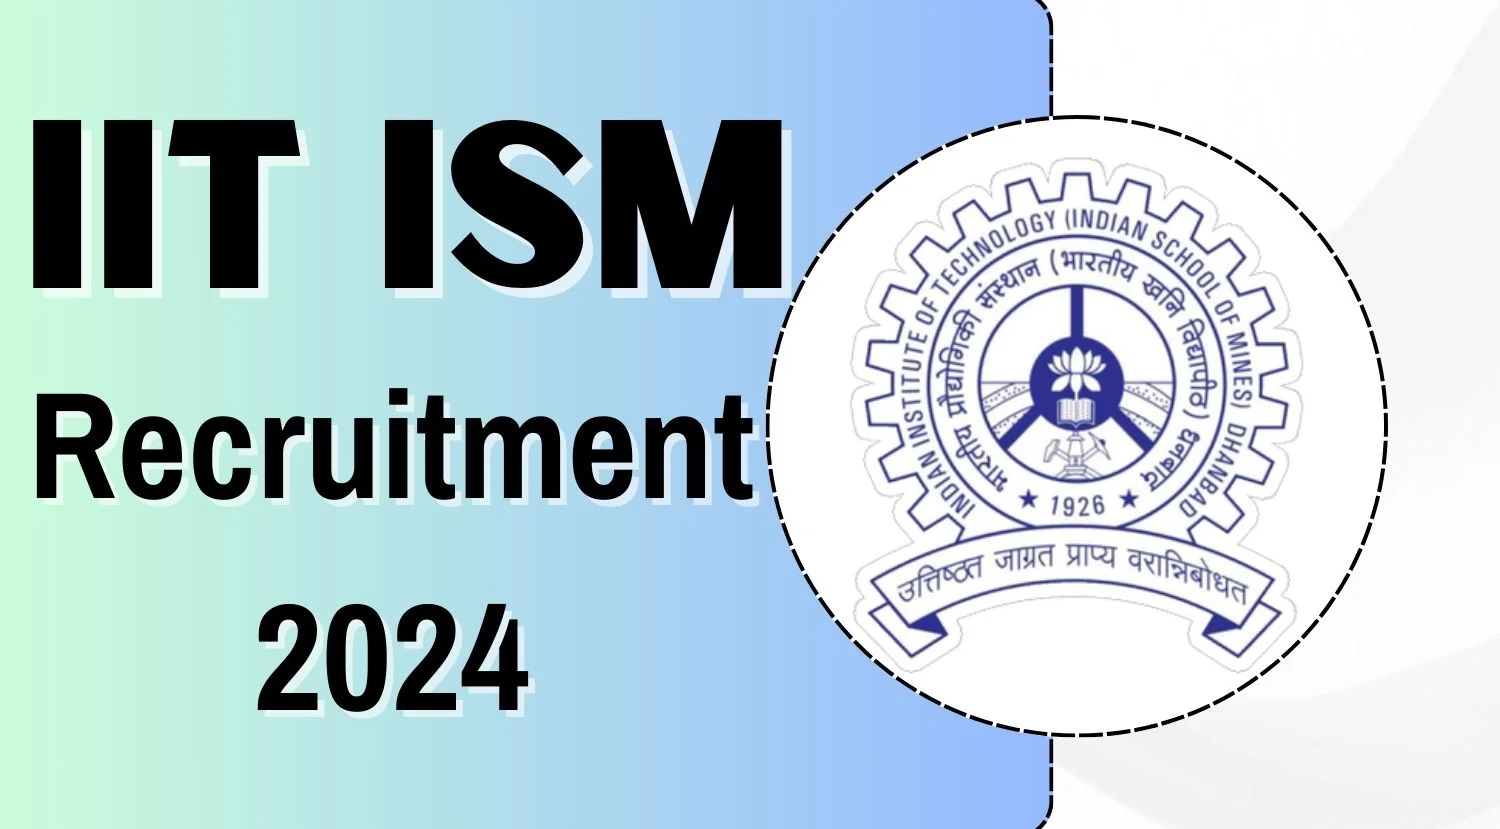 Indian Institute of Technology Dhanbad Senior Research Fellow Recruitment 2024